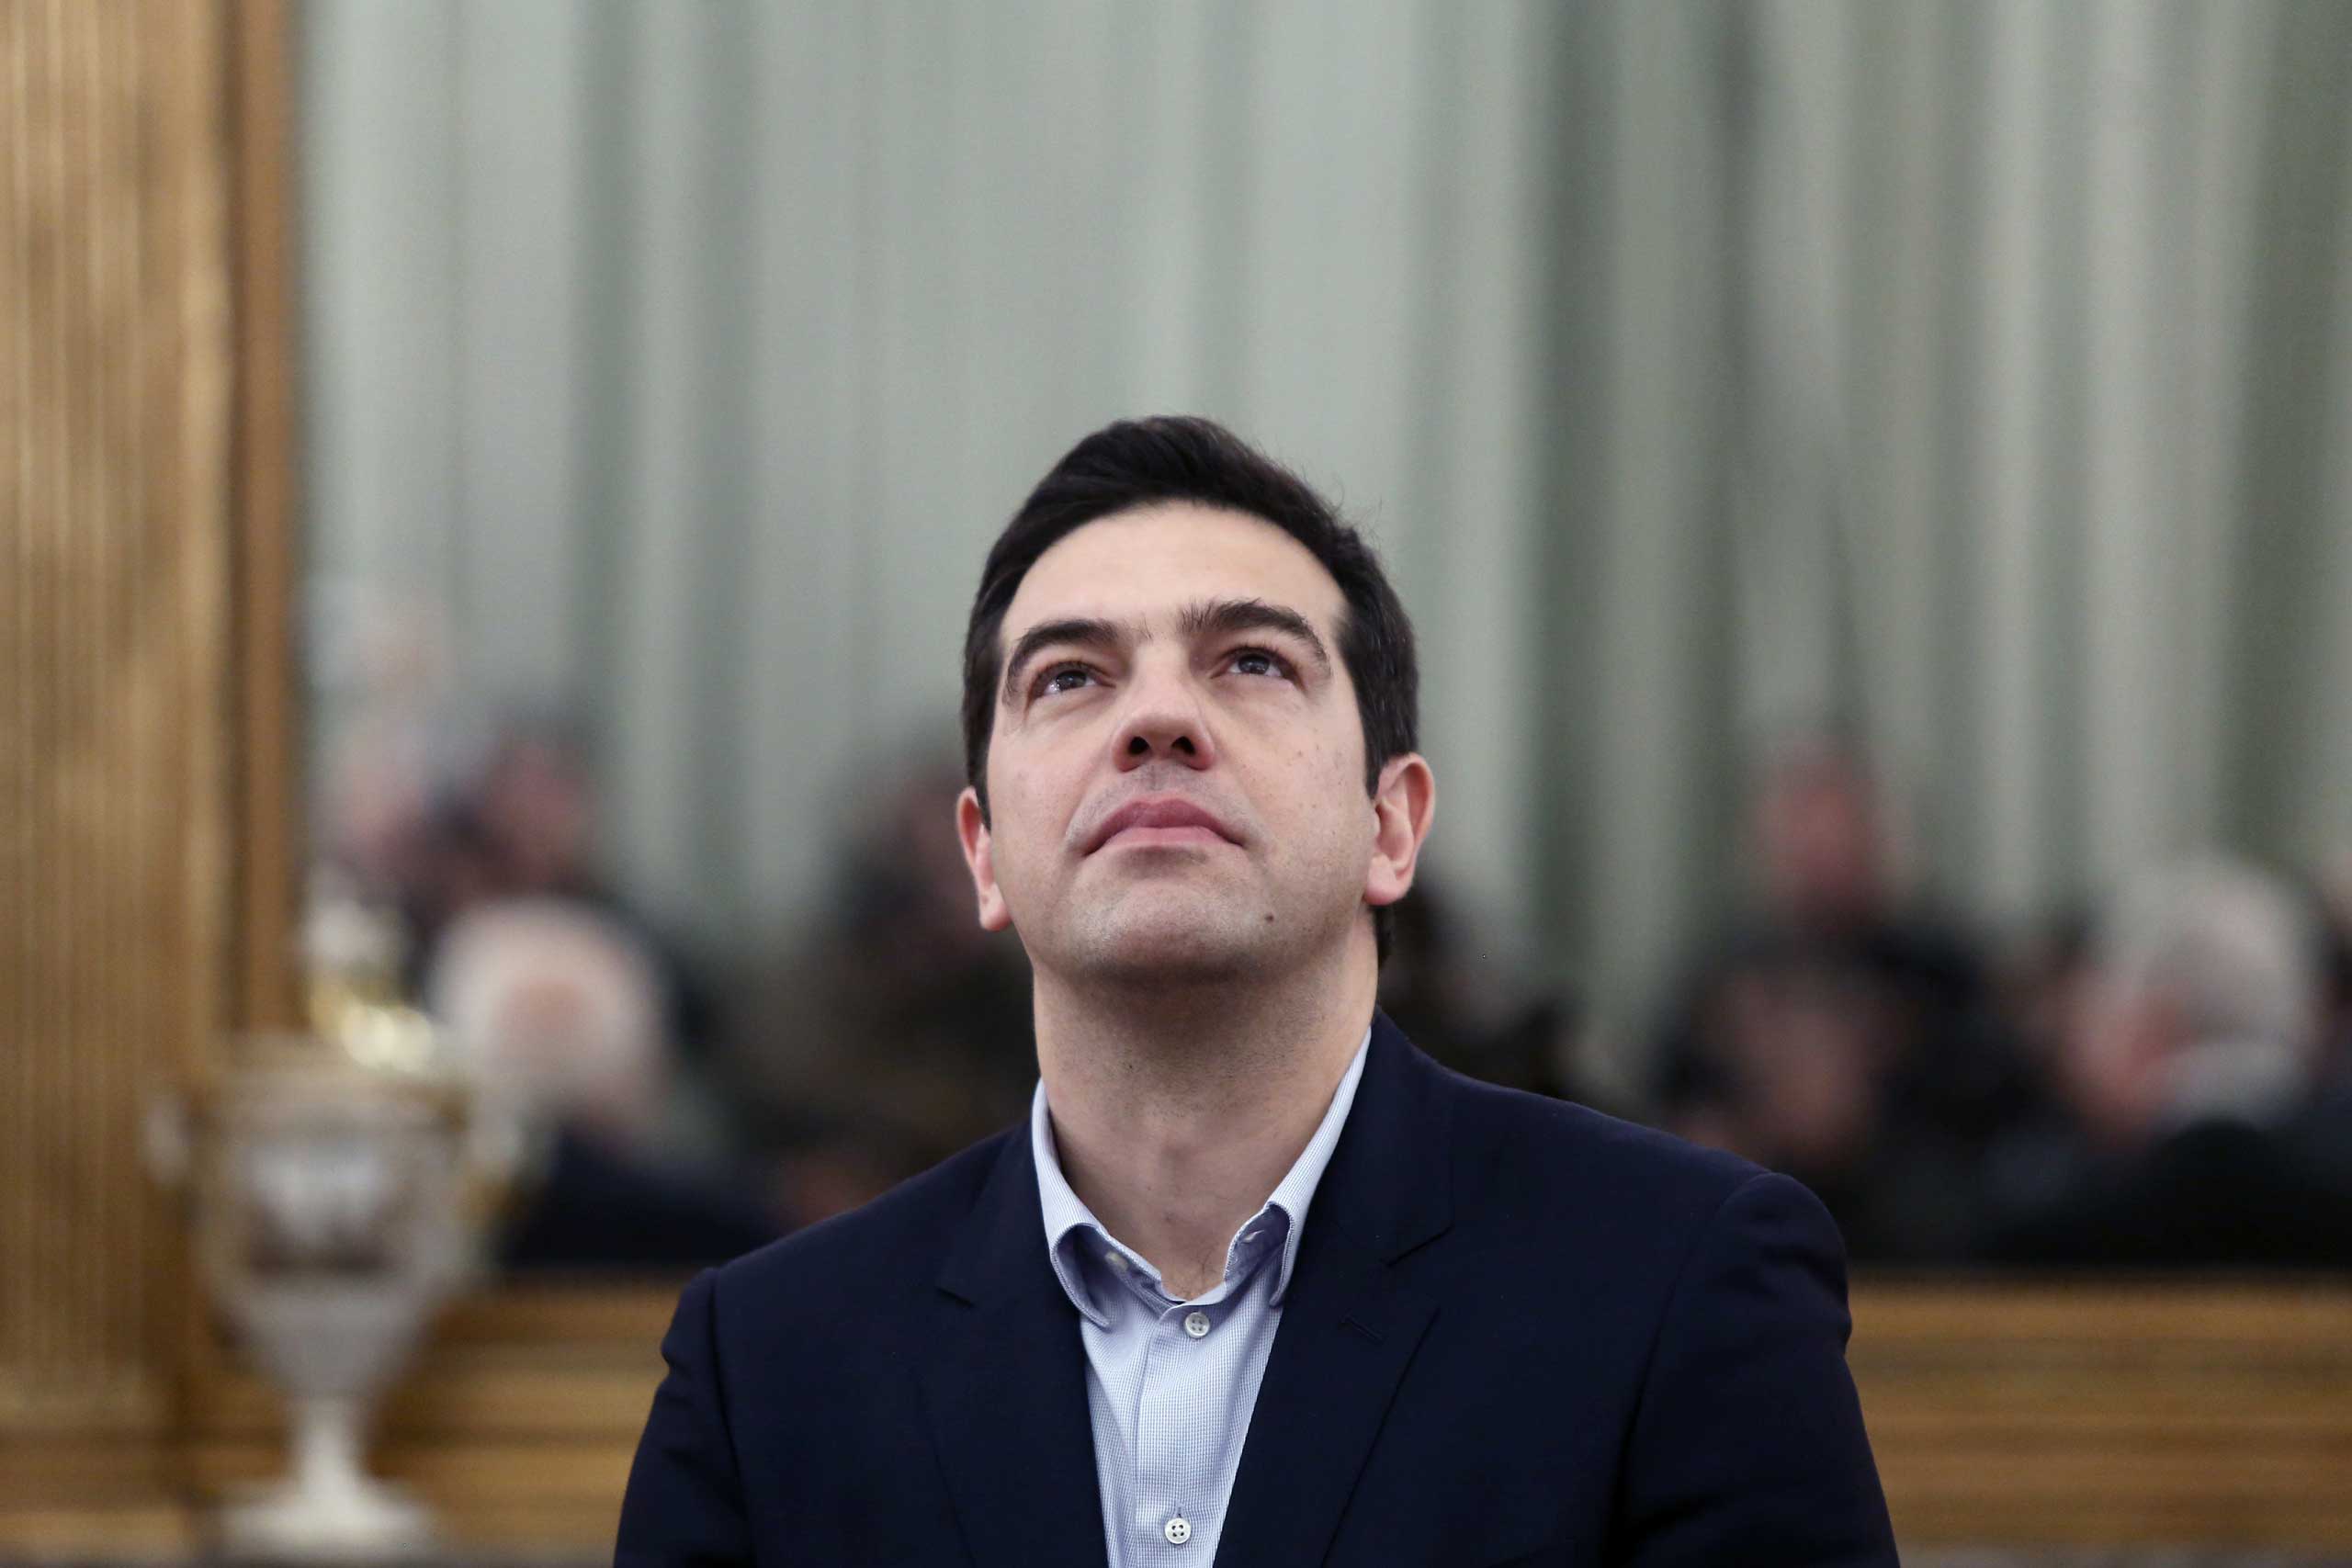 Greek Prime Minister and Syriza party leader Alexis Tsipras, at the Presidential palace during the swearing in ceremony of the new Greek Government, Athens, Jan. 27, 2015 . (Panayiotis Tzamaros/NurPhoto/Corbis)